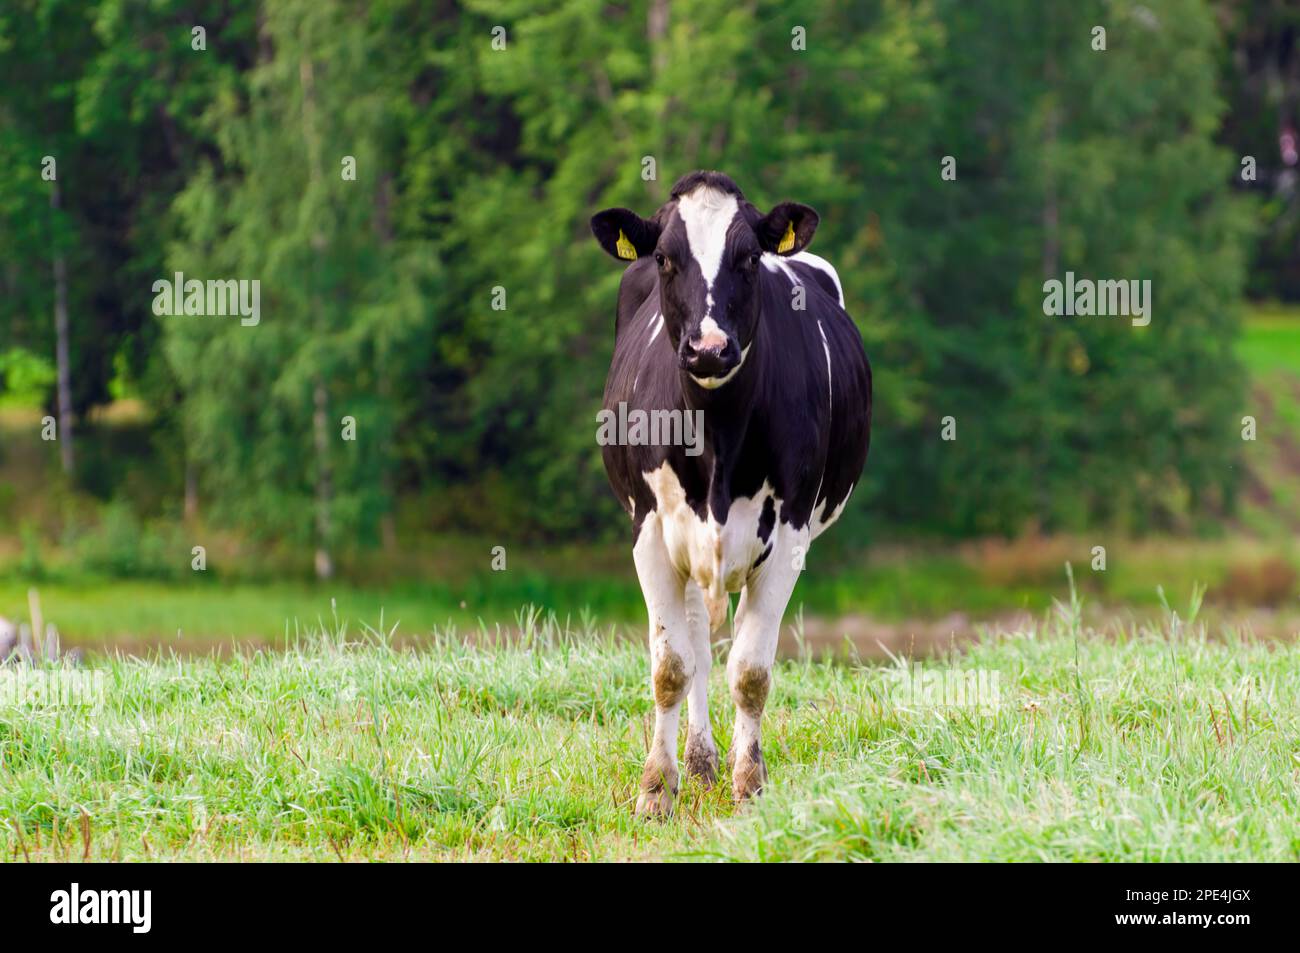 Holstein friesian cattle. A black and white cow grazes on a green pasture. Stock Photo